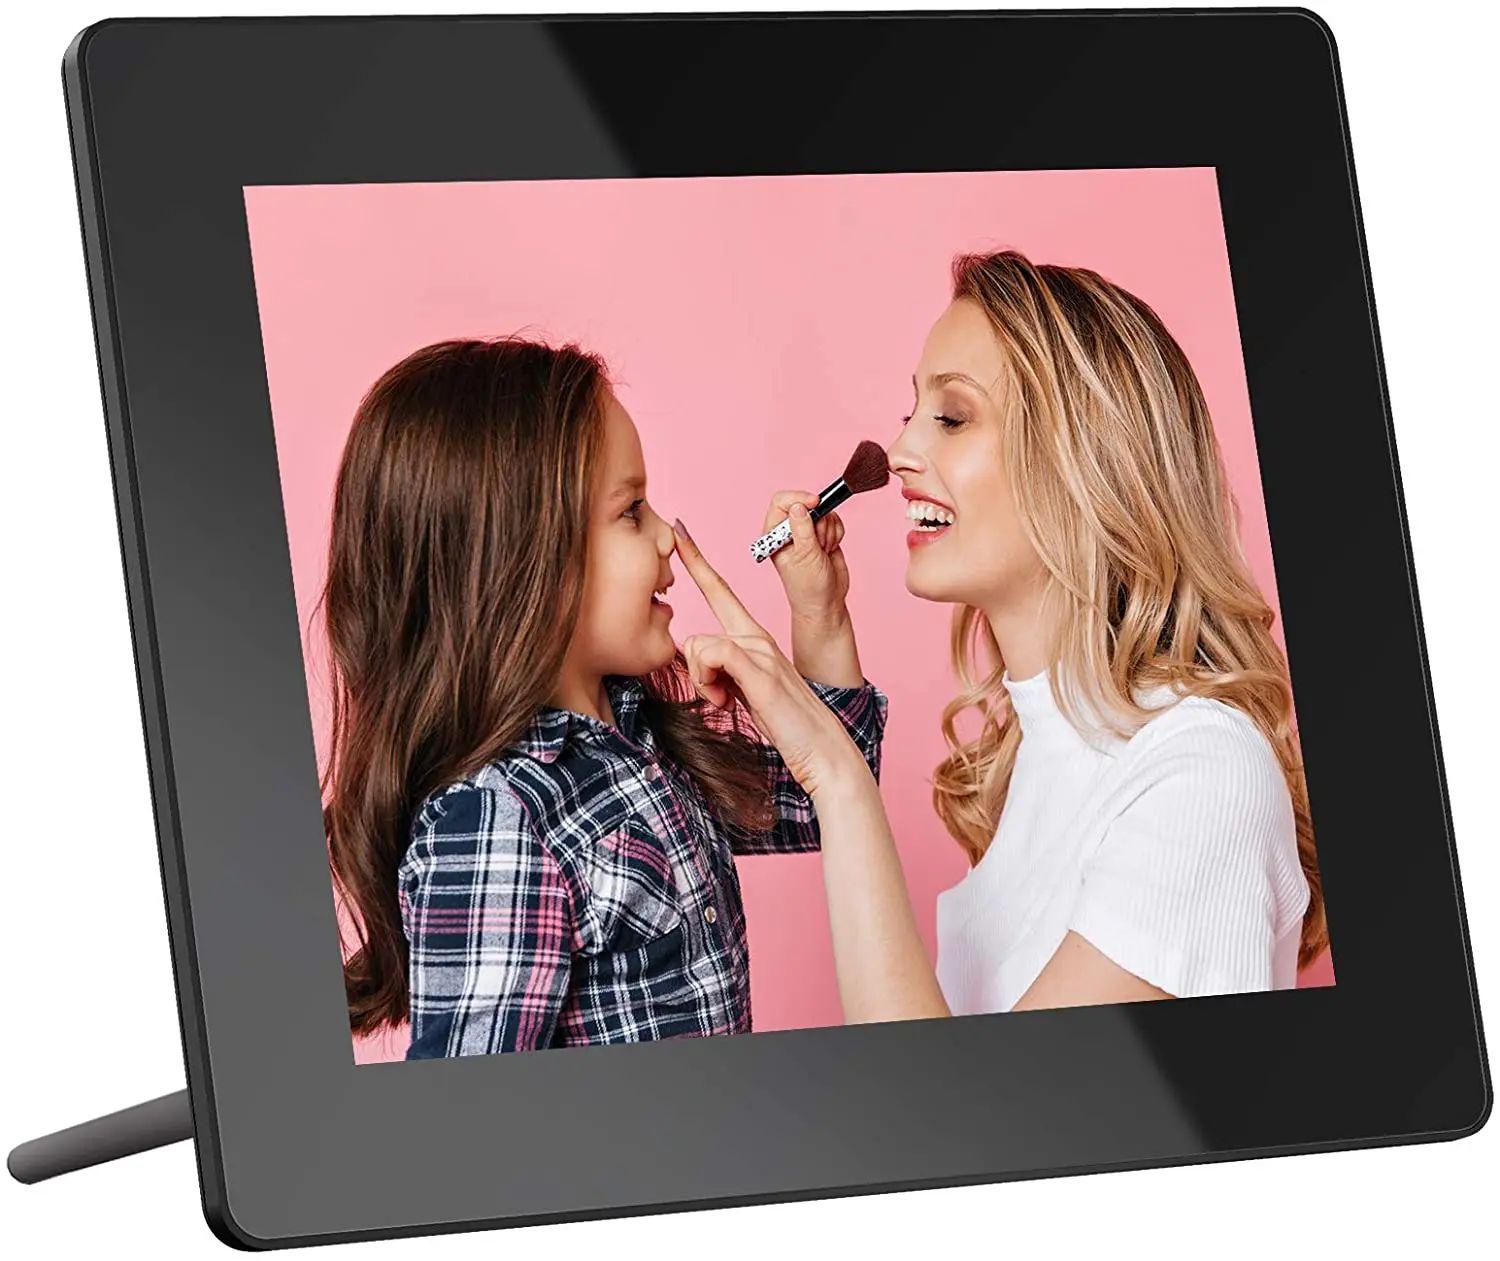 Dragon Touch Digital Picture Frame Inch Wi-Fi Digital Photo Frame IPS  Touch Screen HD Display 16GB Storage upport USB Drive/SD AliExpress